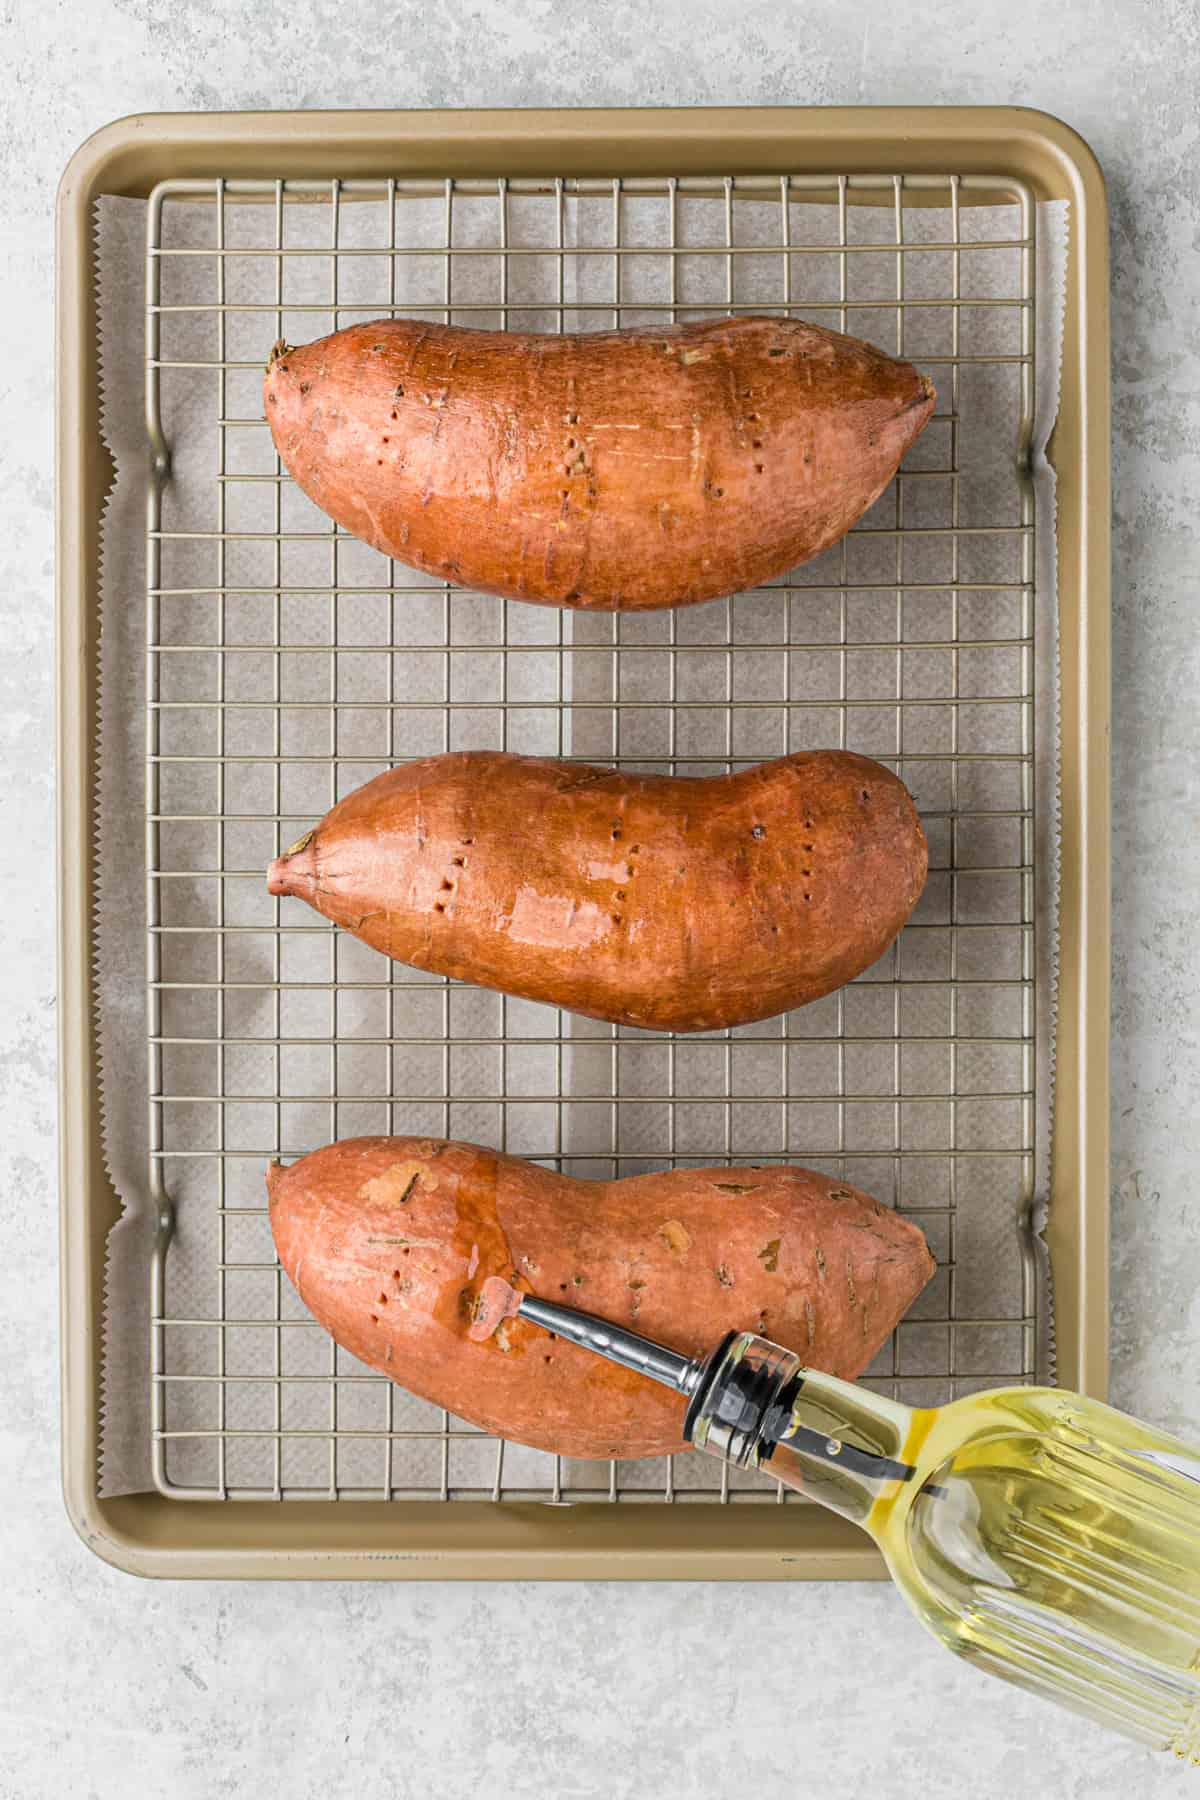 Drizzling olive oil over sweet potatoes on a wire rack in a baking sheet.